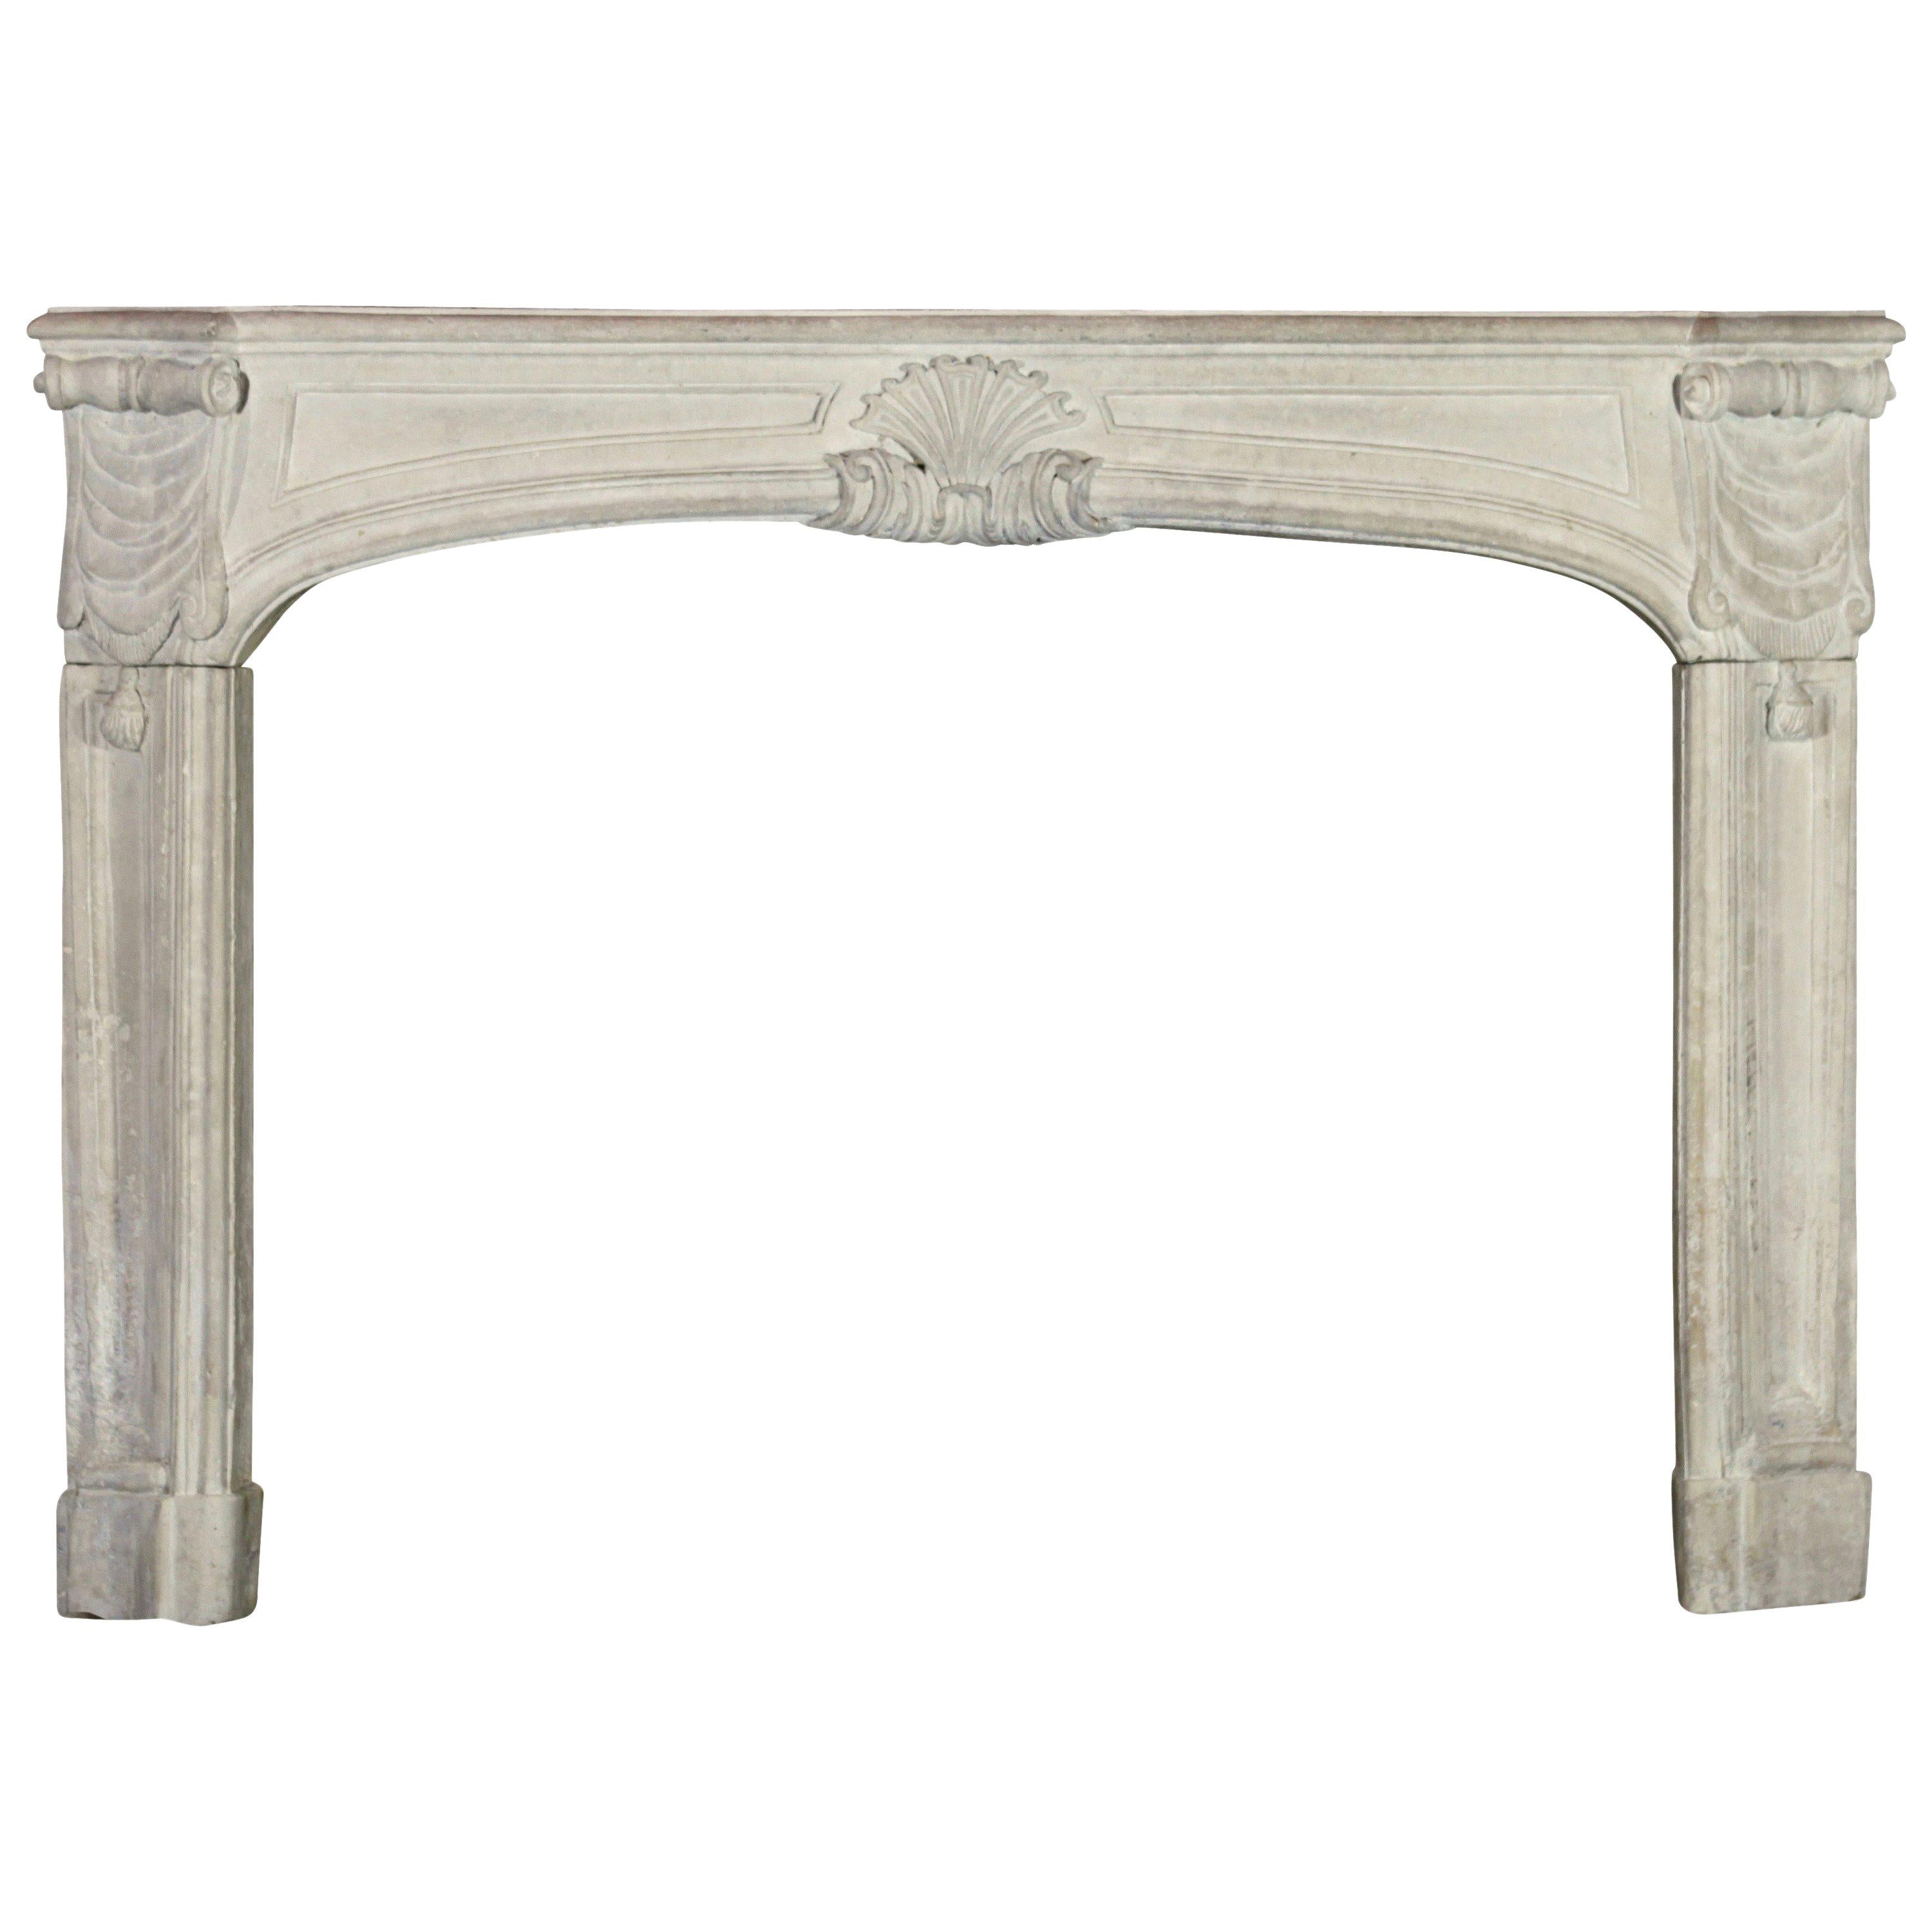 Antique French Classic Limestone Fireplace Mantel